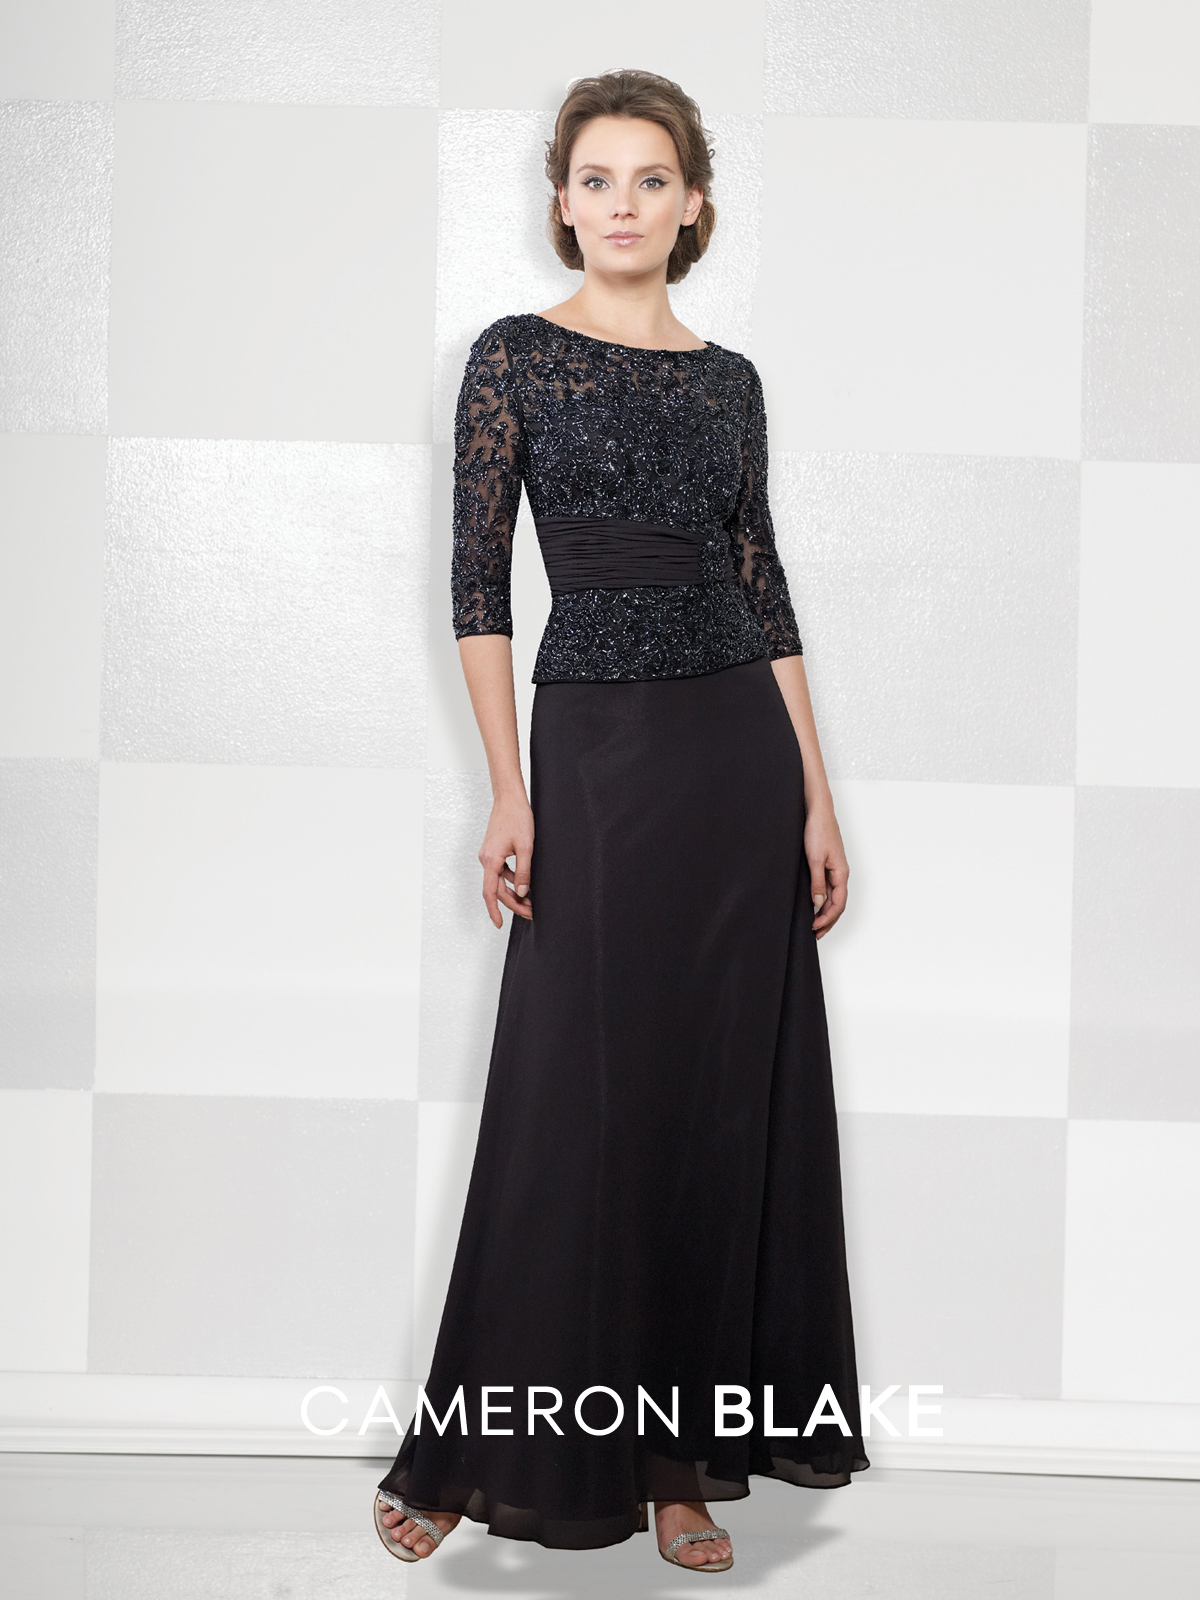 114657 Cameron Blake Mother of the Bride or Groom Dress